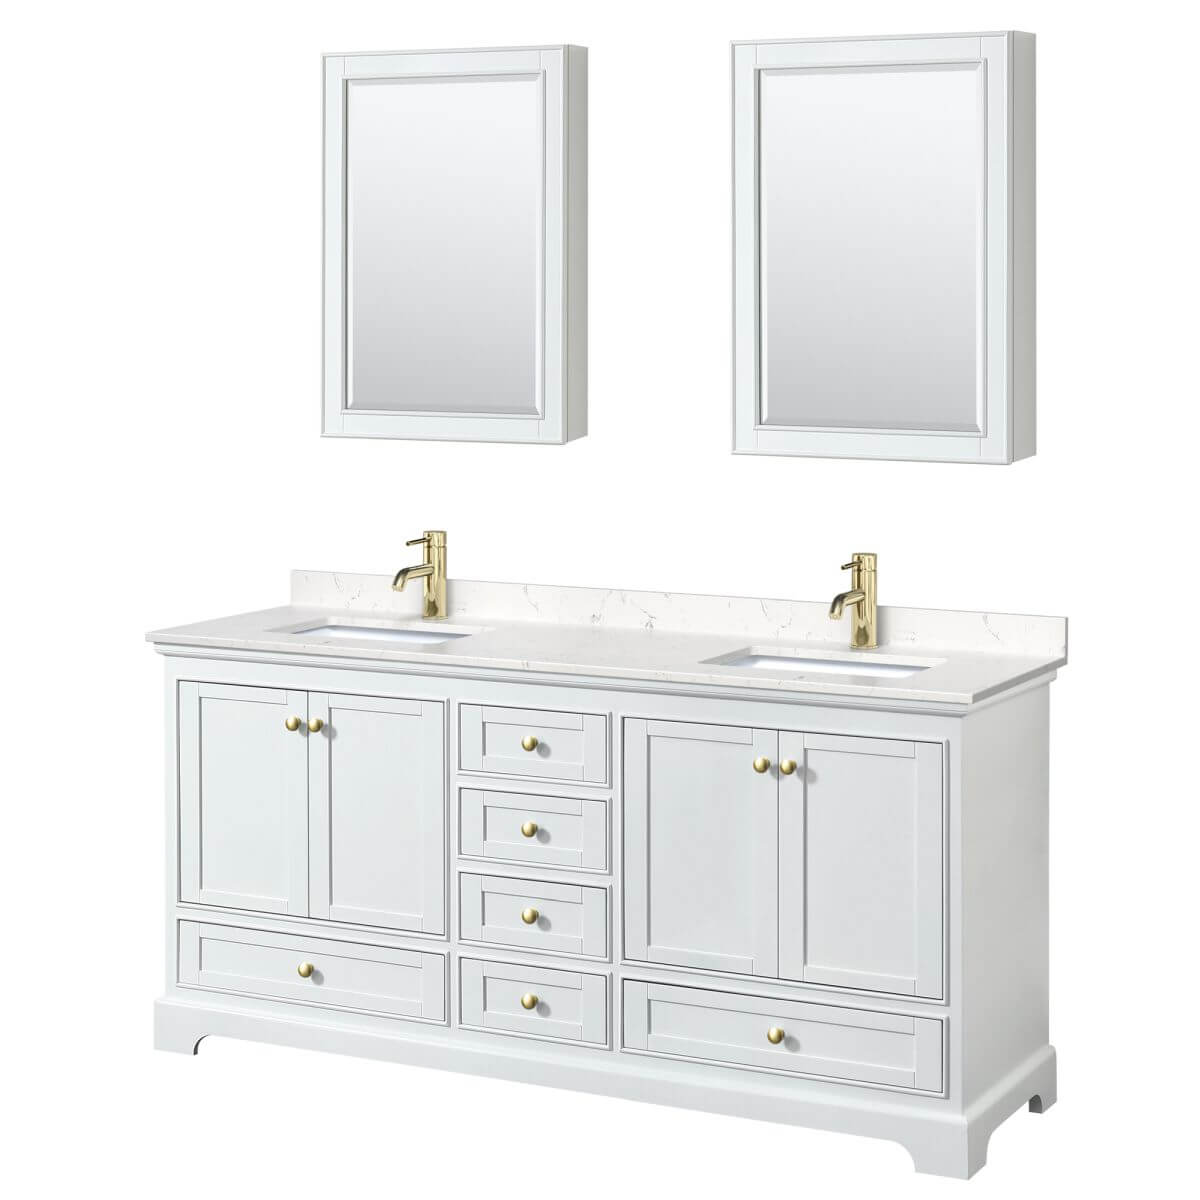 Wyndham Collection Deborah 72 inch Double Bathroom Vanity in White with Carrara Cultured Marble Countertop, Undermount Square Sinks, Brushed Gold Trim and Medicine Cabinets - WCS202072DWGC2UNSMED